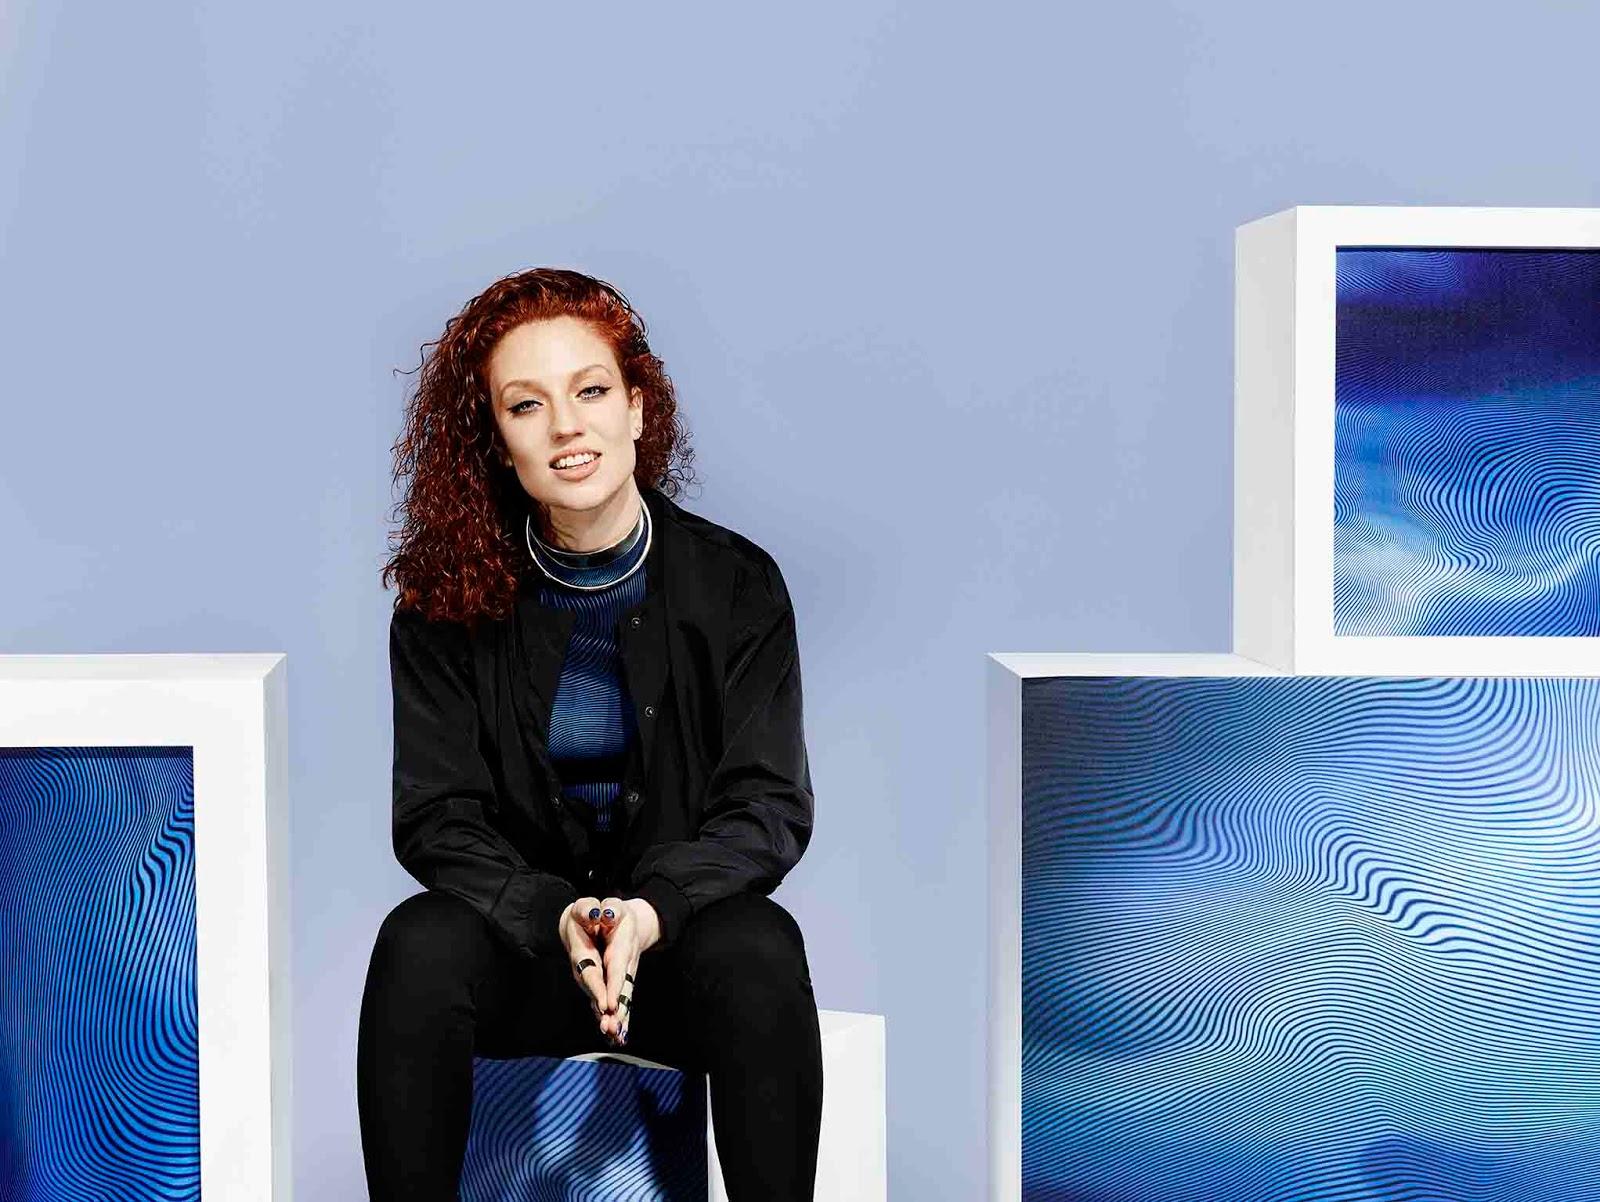 JESS GLYNNE X BENCH SS16 CAPSULE COLLECTION